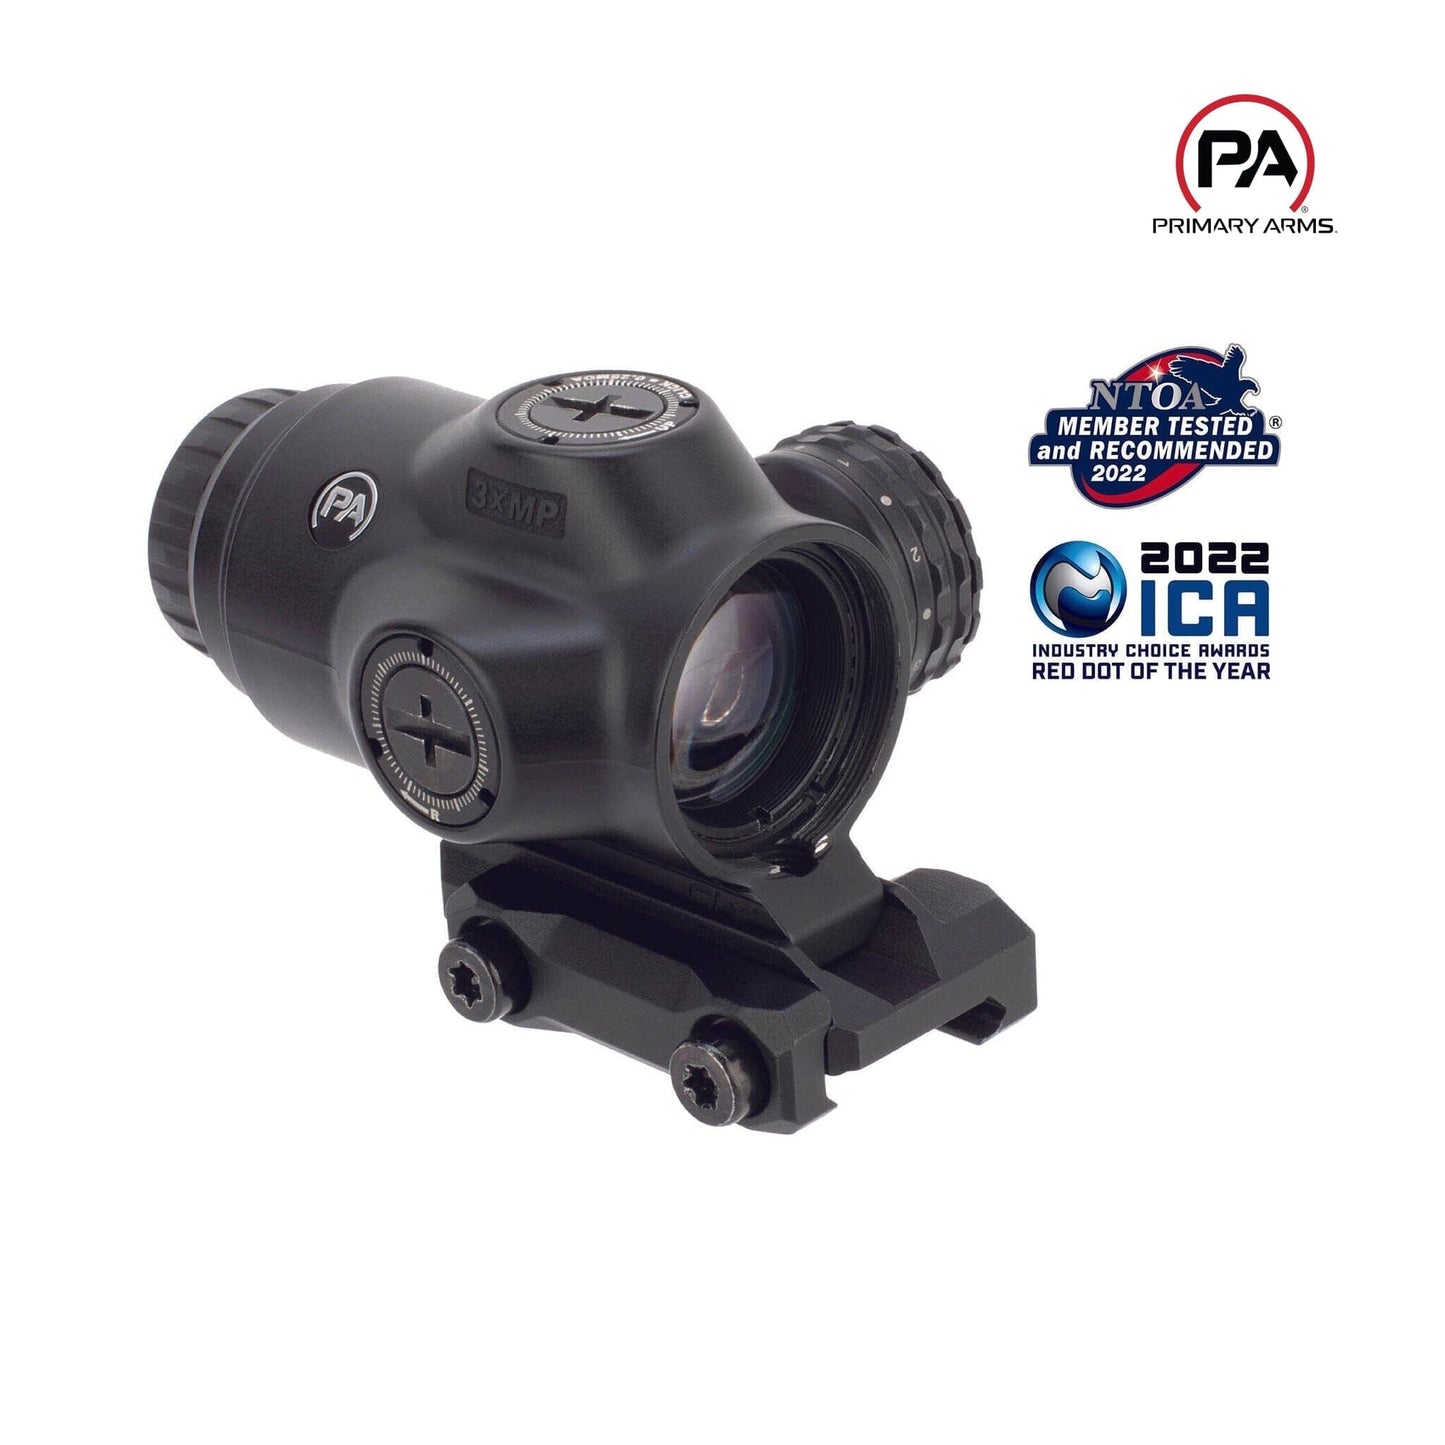 Primary Arms SLx 3x MicroPrism Sight - Green ACSS Raptor 7.62x39/.300BLK - Yard Reticle Prism Rifle Scope Primary Arms 